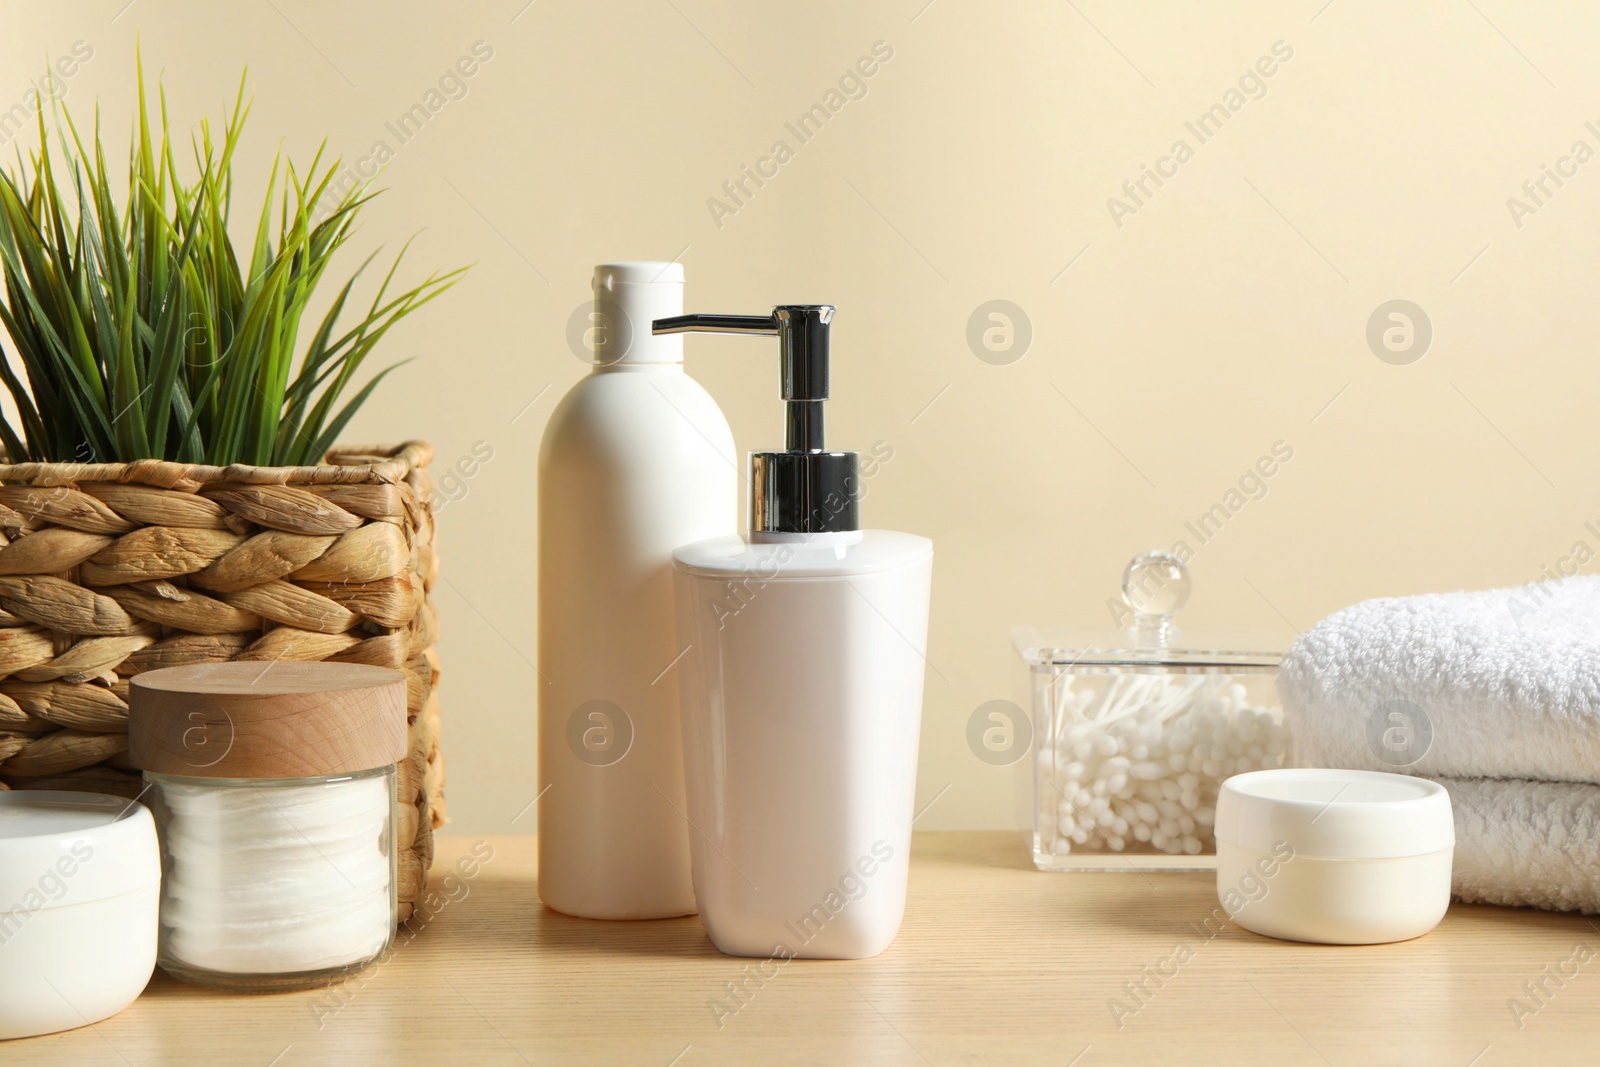 Photo of Different bath accessories and houseplant on wooden table against beige background, closeup